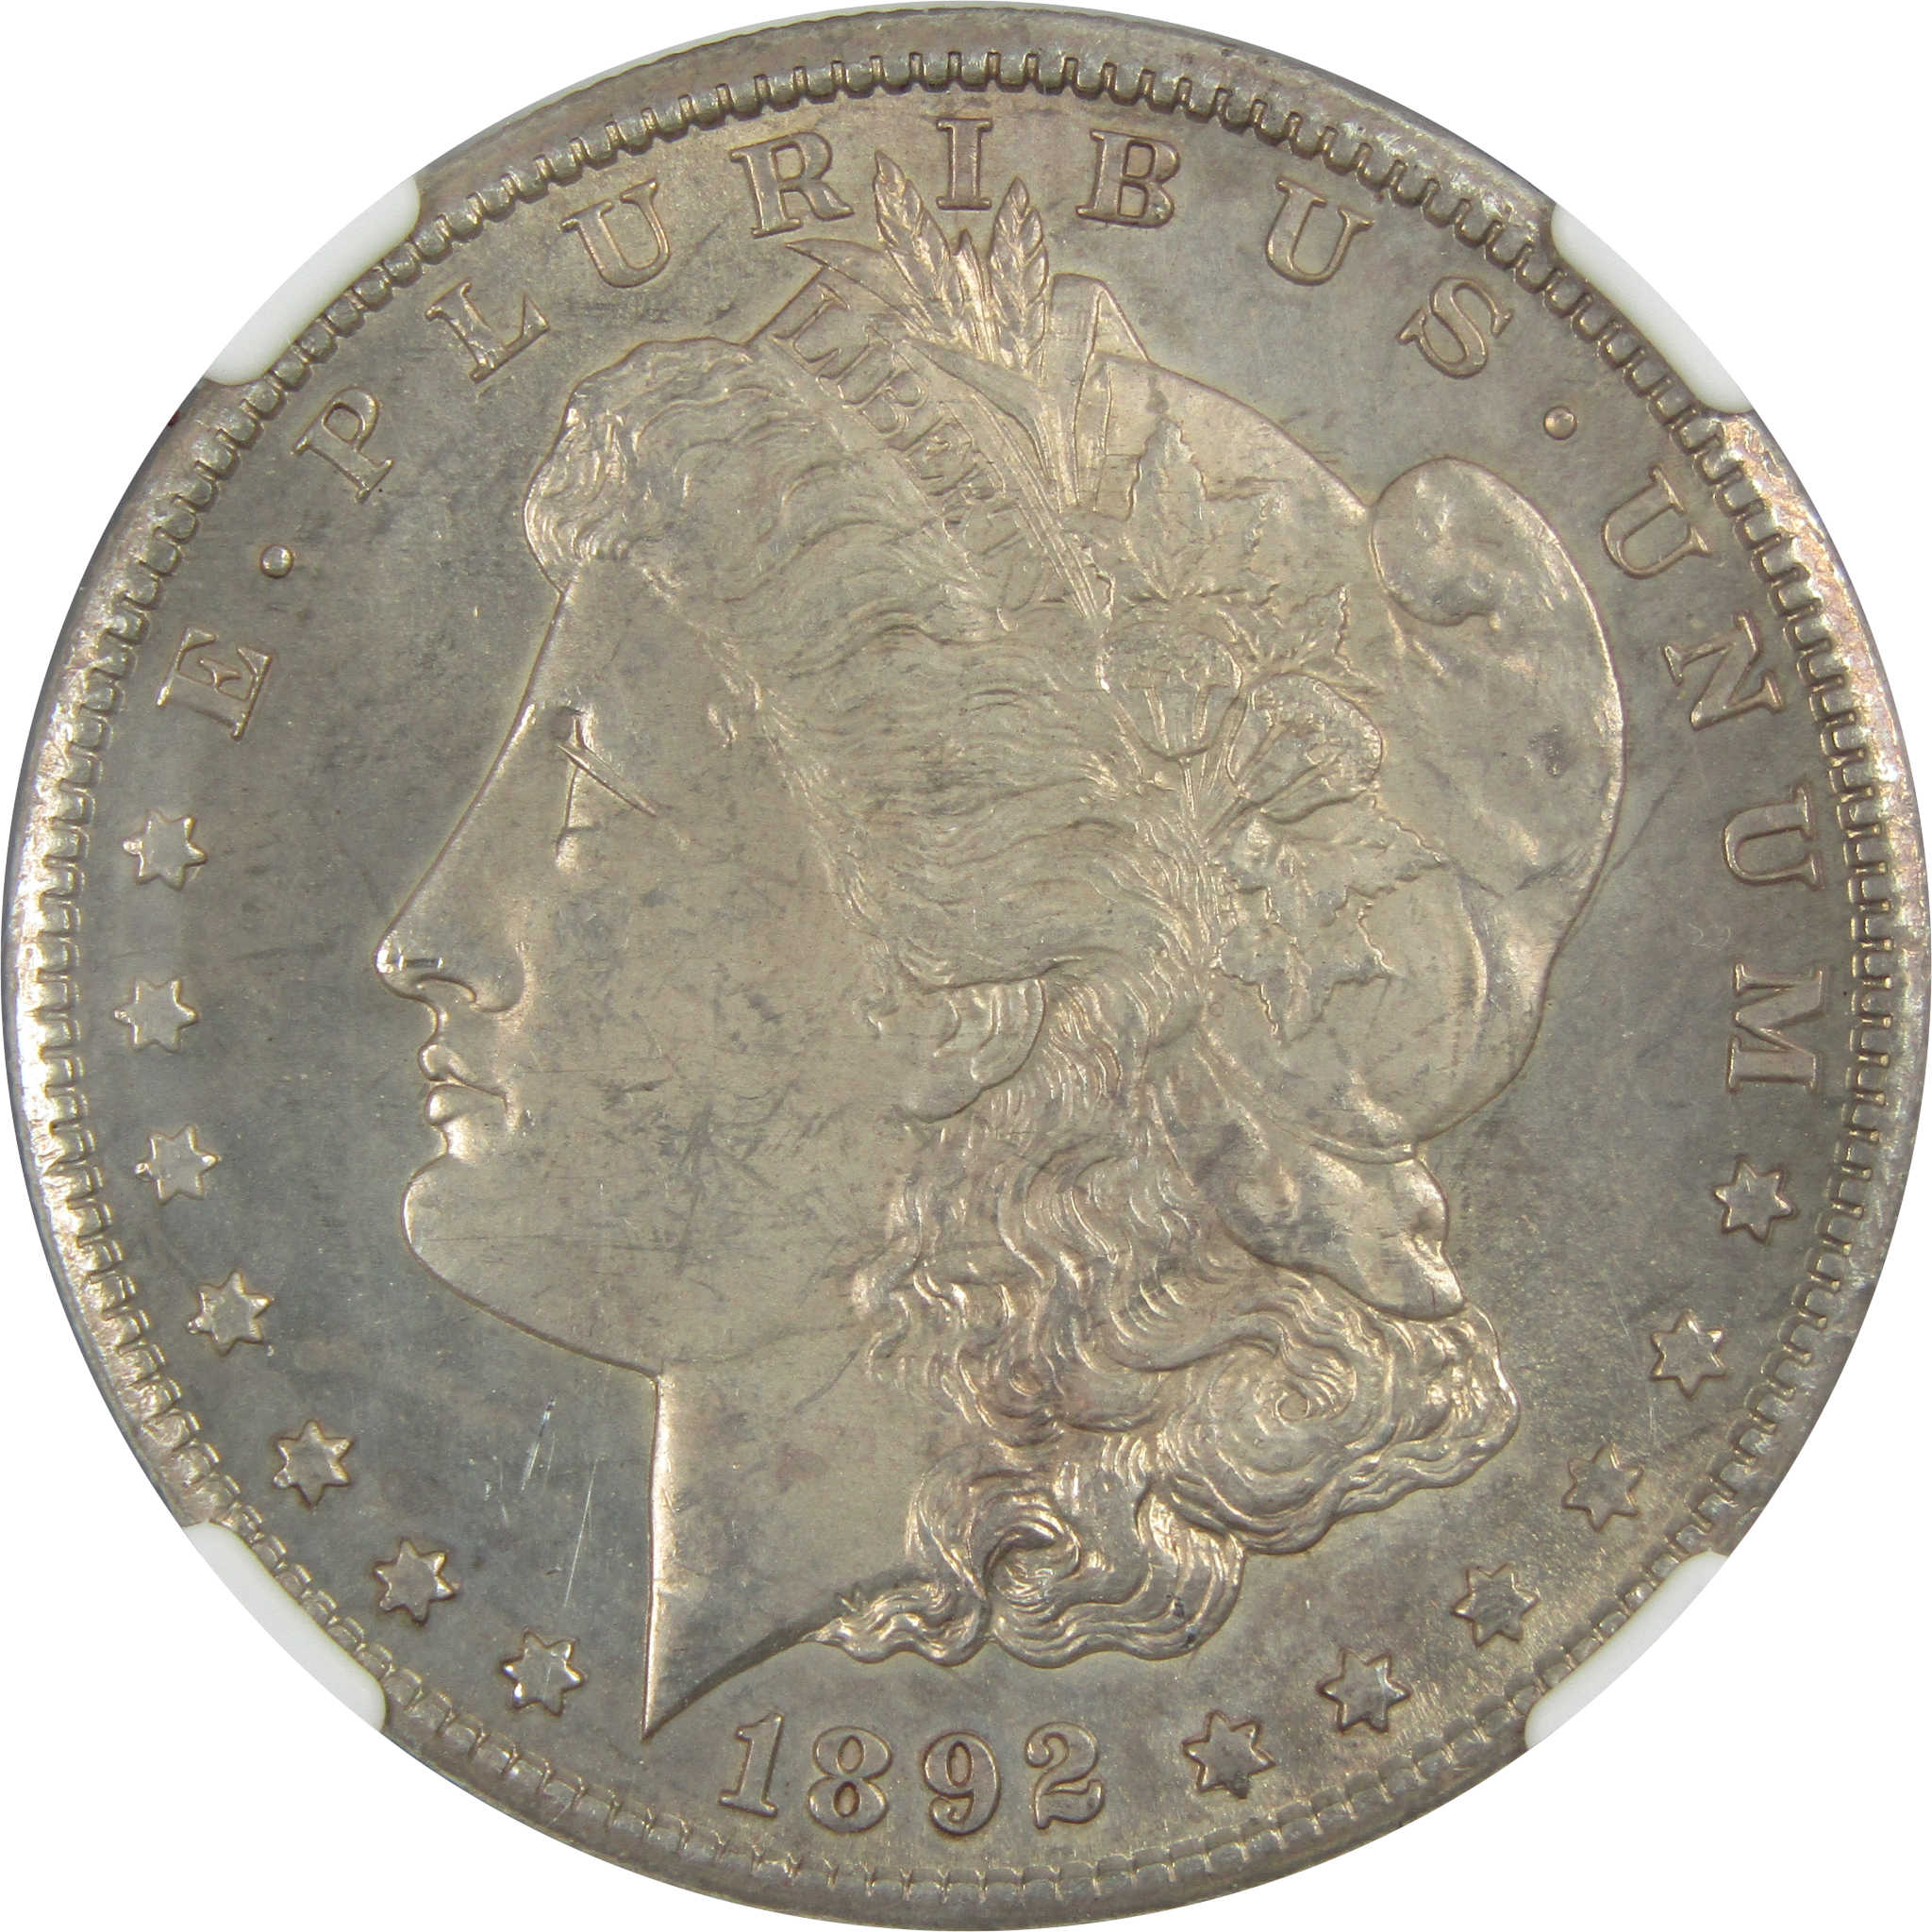 1892 CC Morgan Dollar MS 60 Details NGC 90% Silver $1 Unc SKU:I7422 - Morgan coin - Morgan silver dollar - Morgan silver dollar for sale - Profile Coins &amp; Collectibles